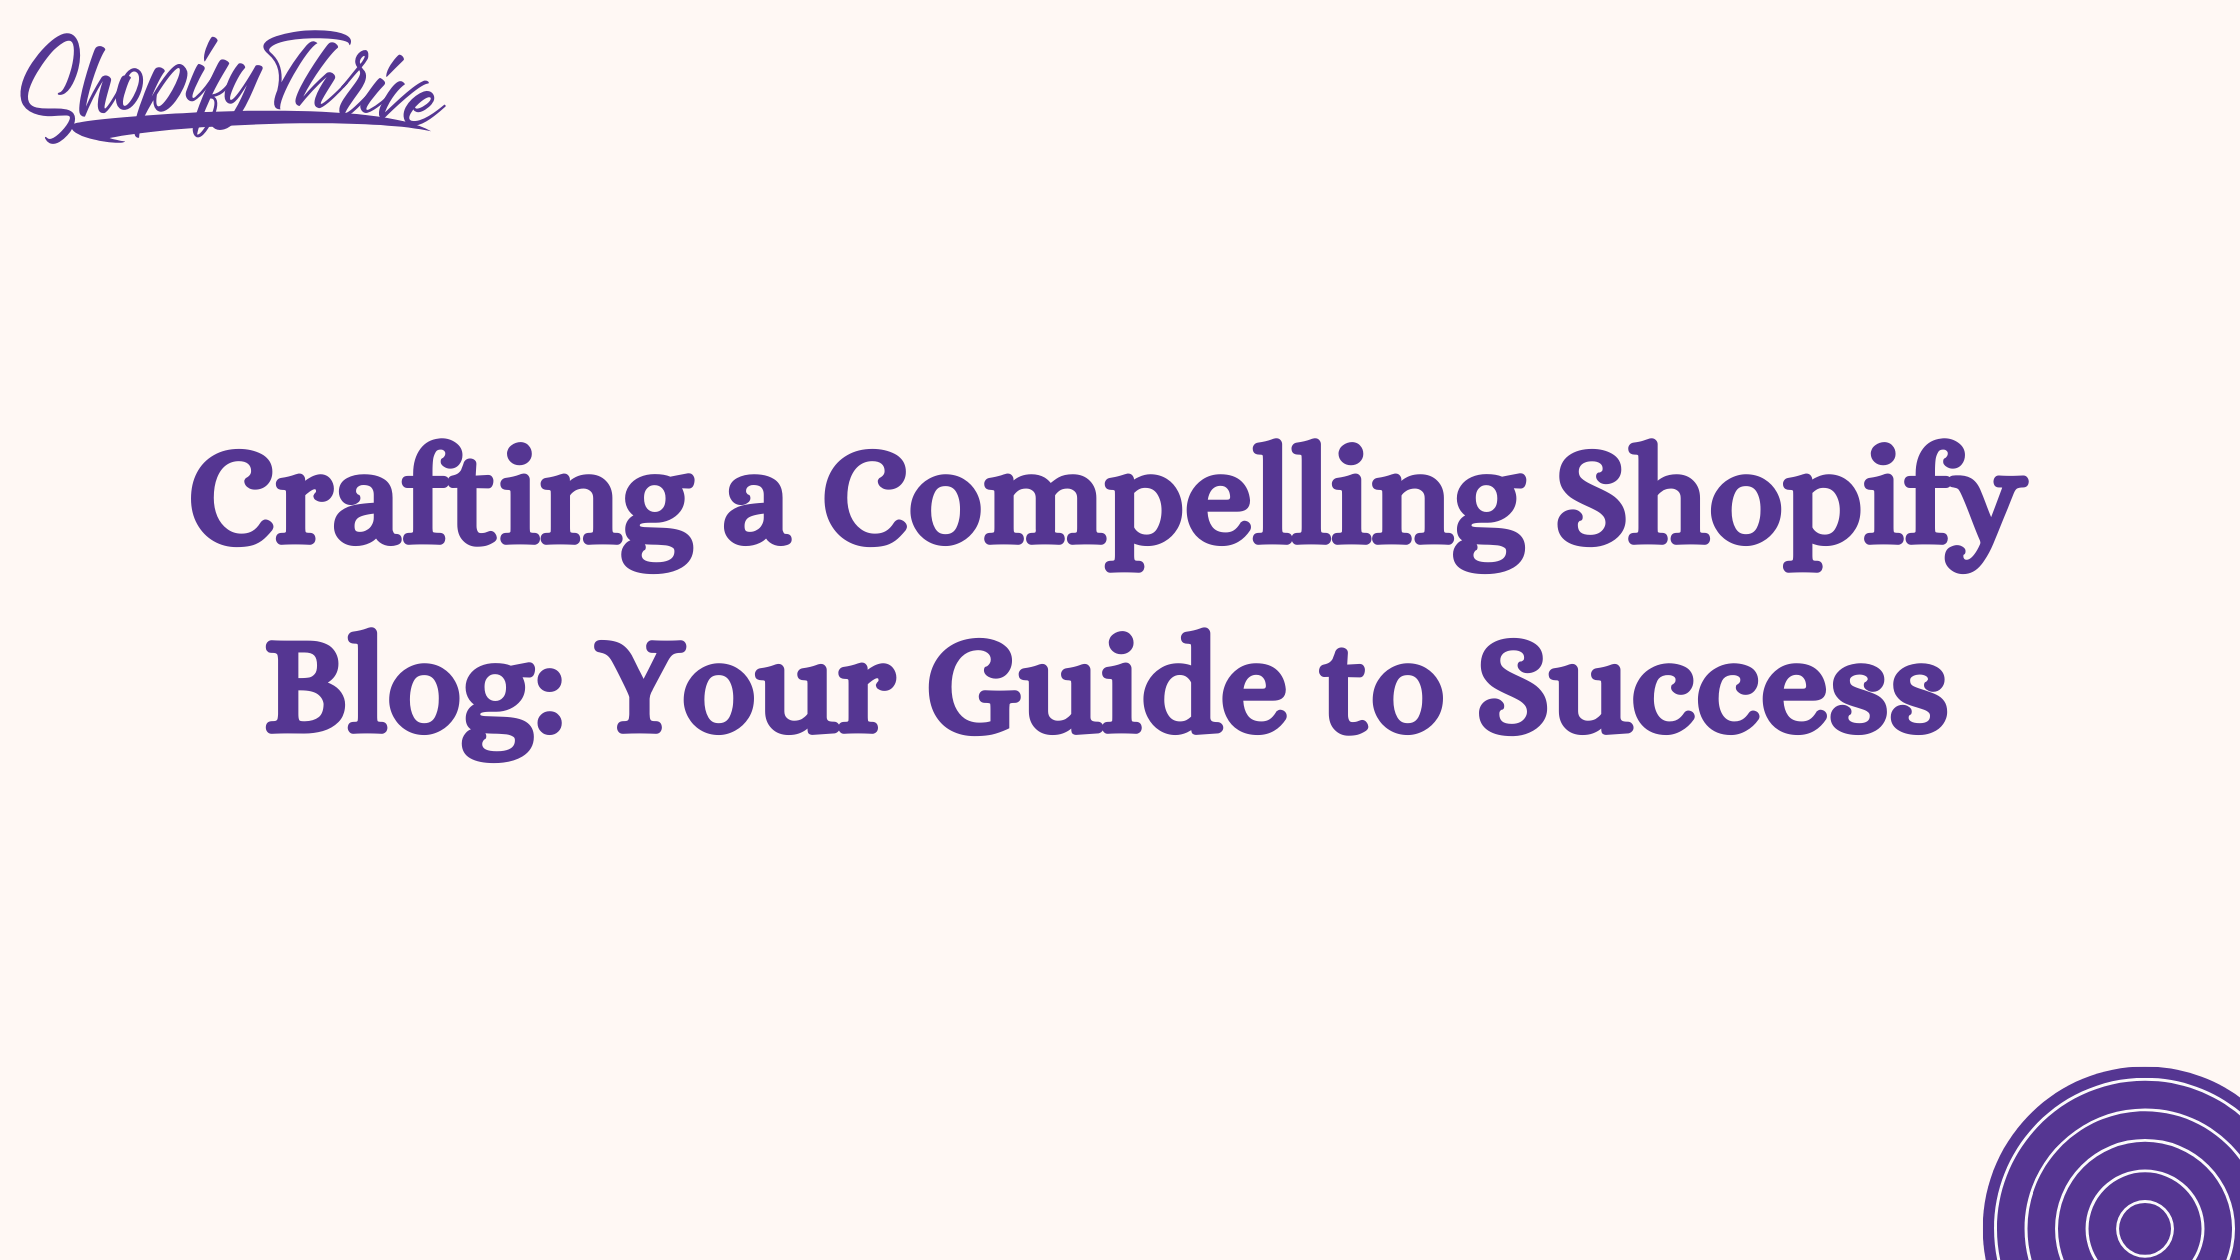 Crafting a Compelling Shopify Blog: Your Guide to Success